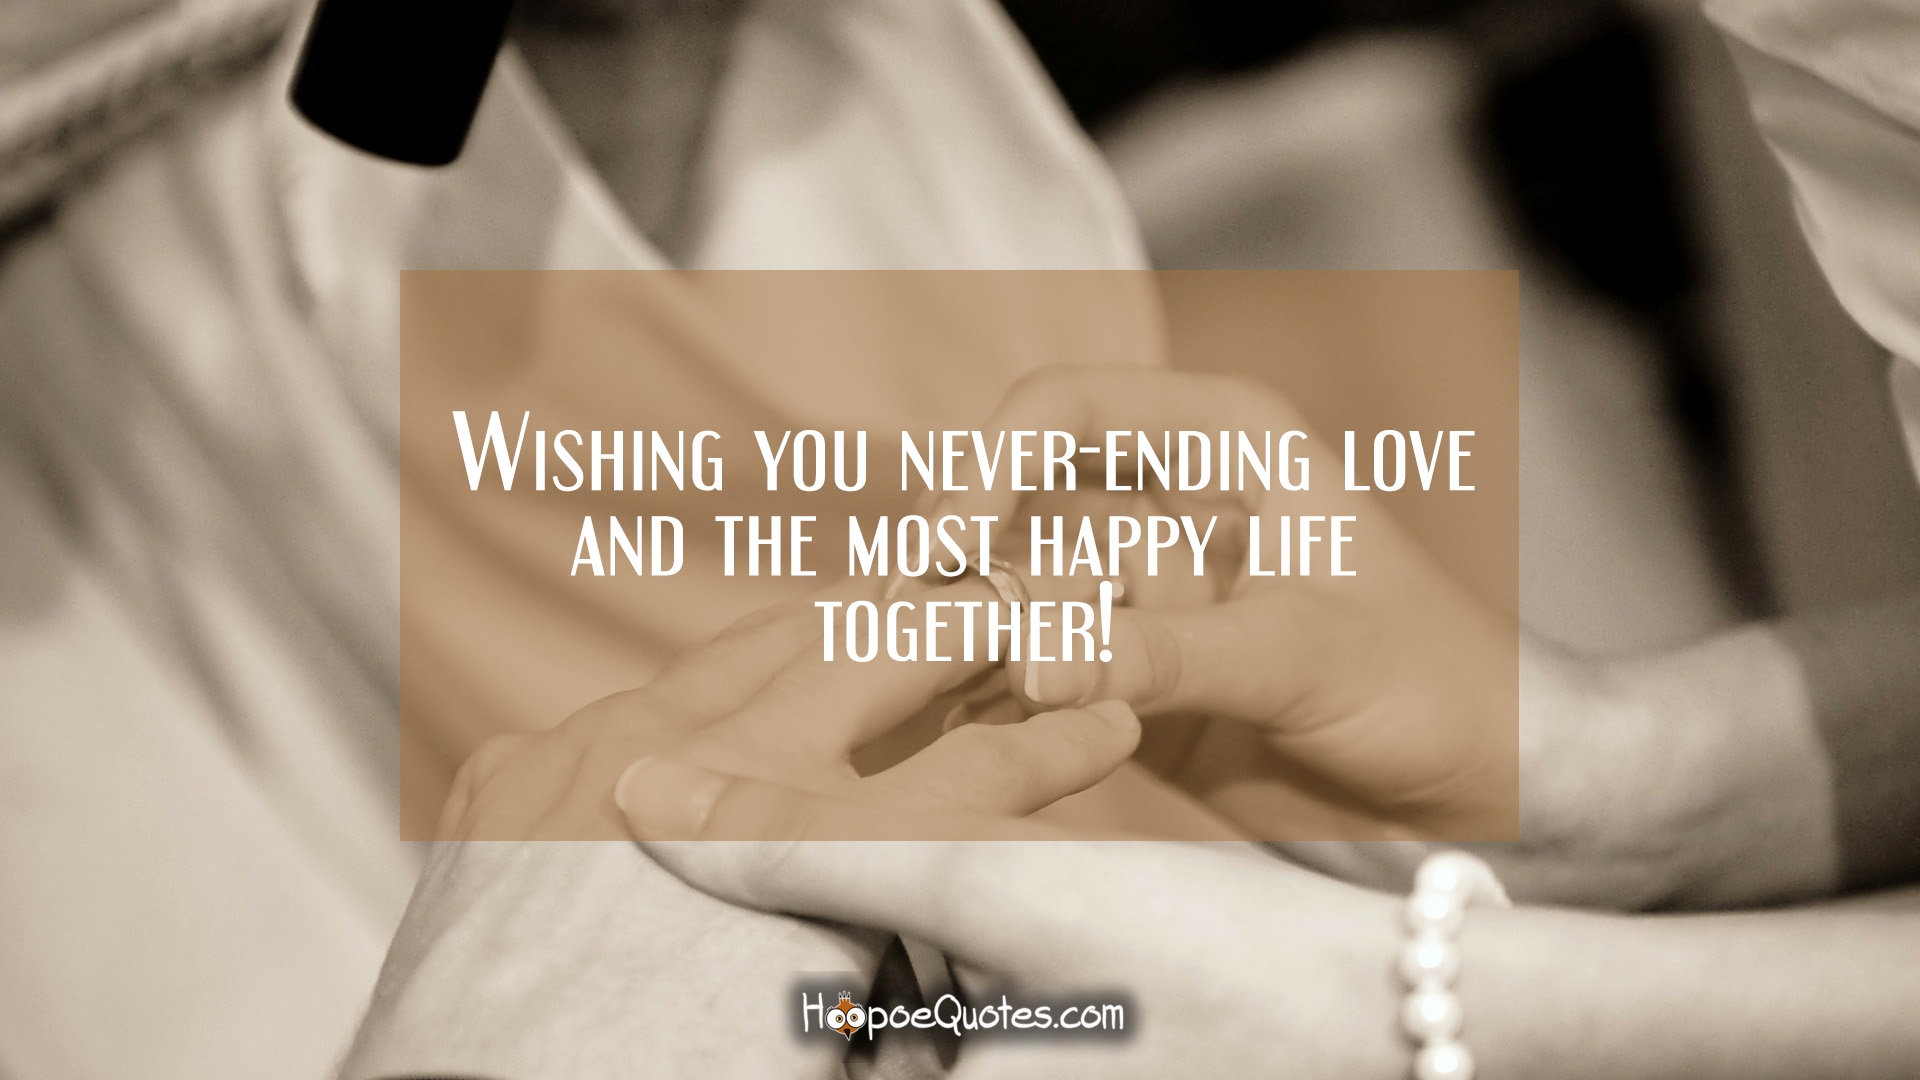 Wish You Happy Life Together - HD Wallpaper 